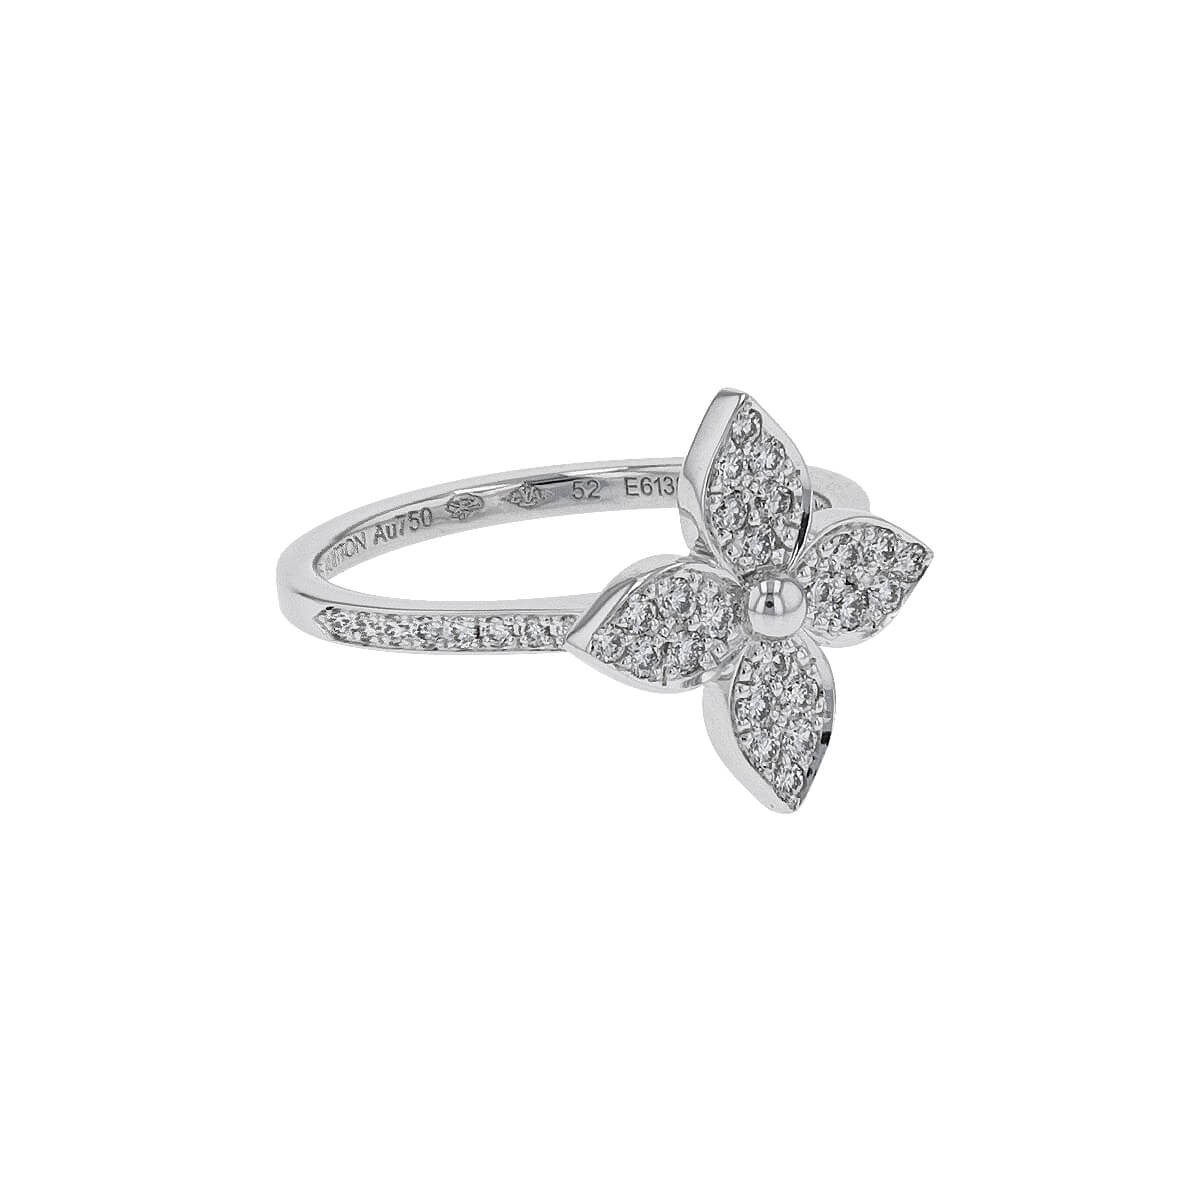 Louis Vuitton® Star Blossom Ring, White Gold And Diamonds